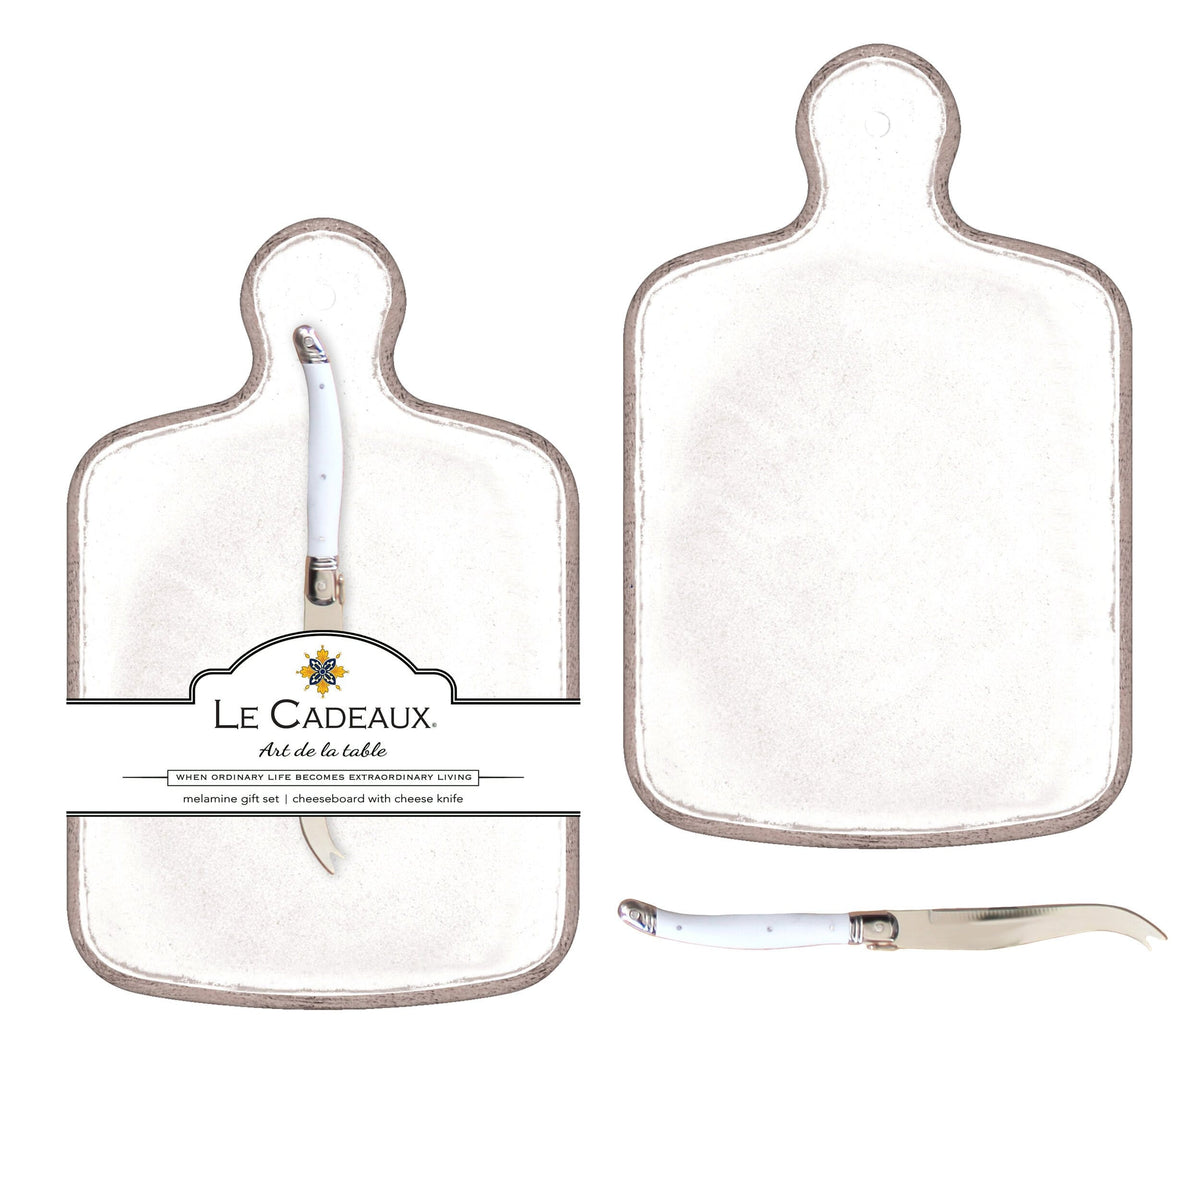 Rustica Antique White Cheeseboard Gift Set